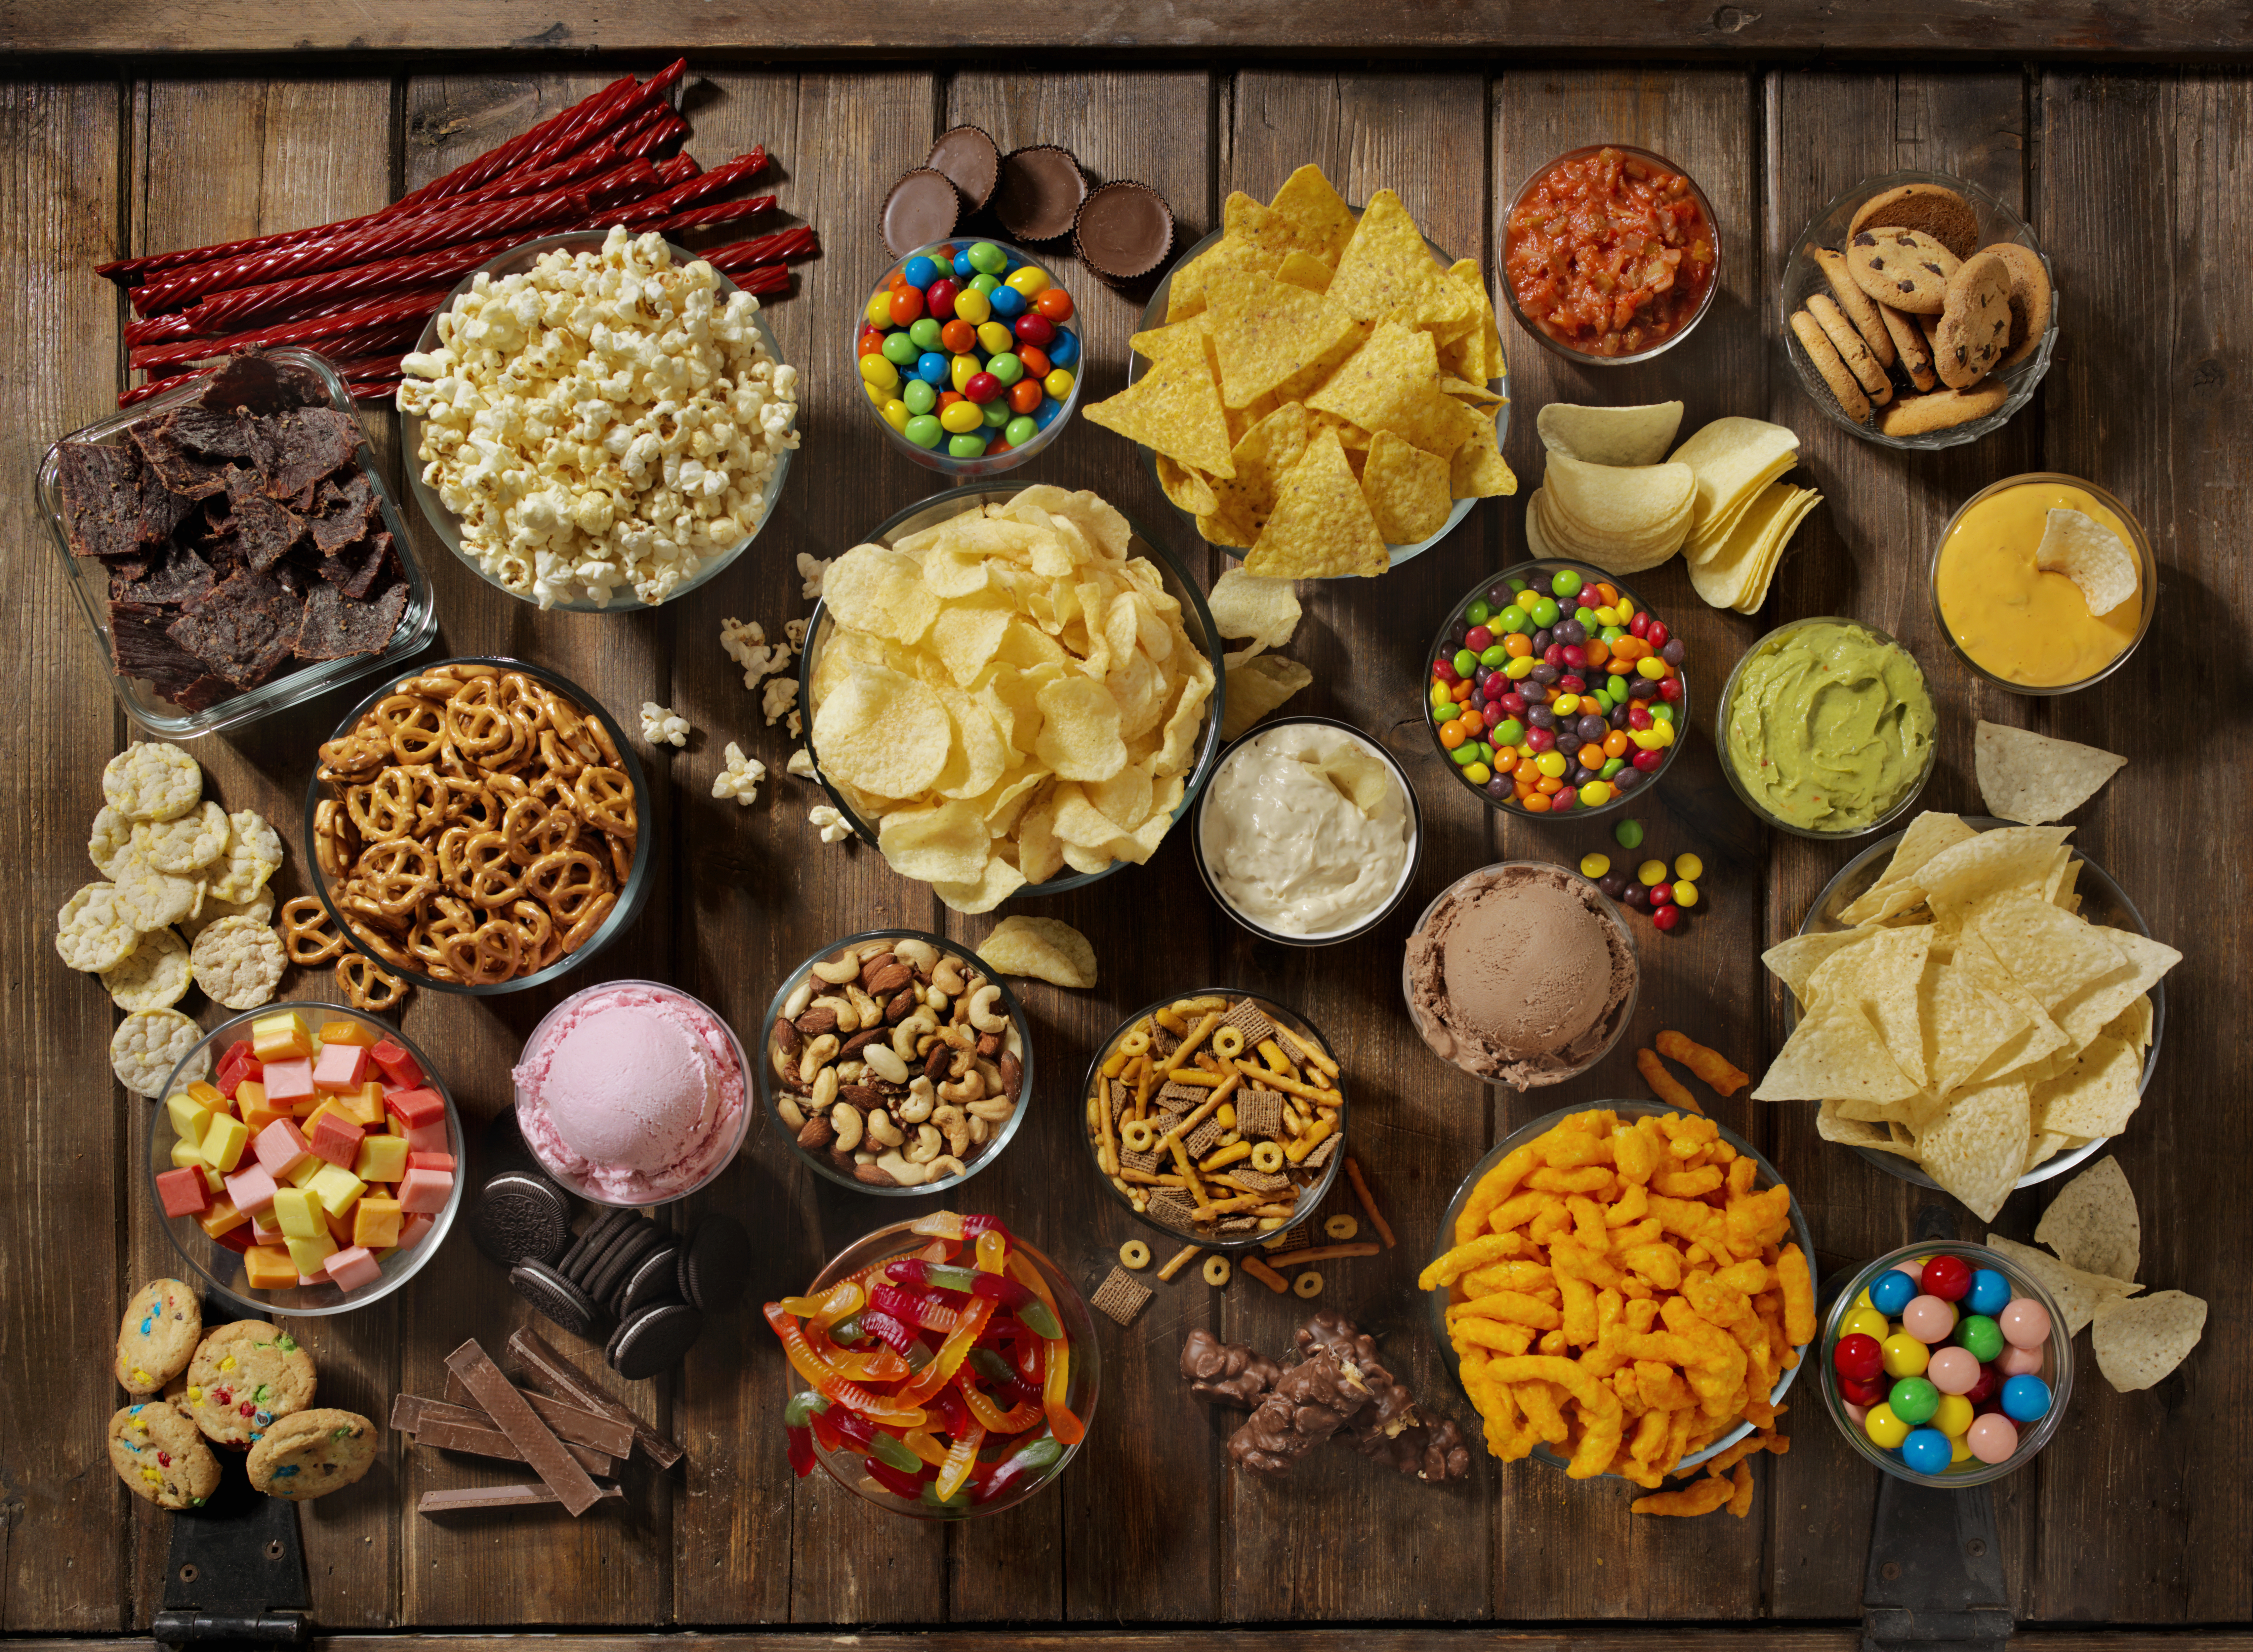 Finger Foods and Snacks and Candy